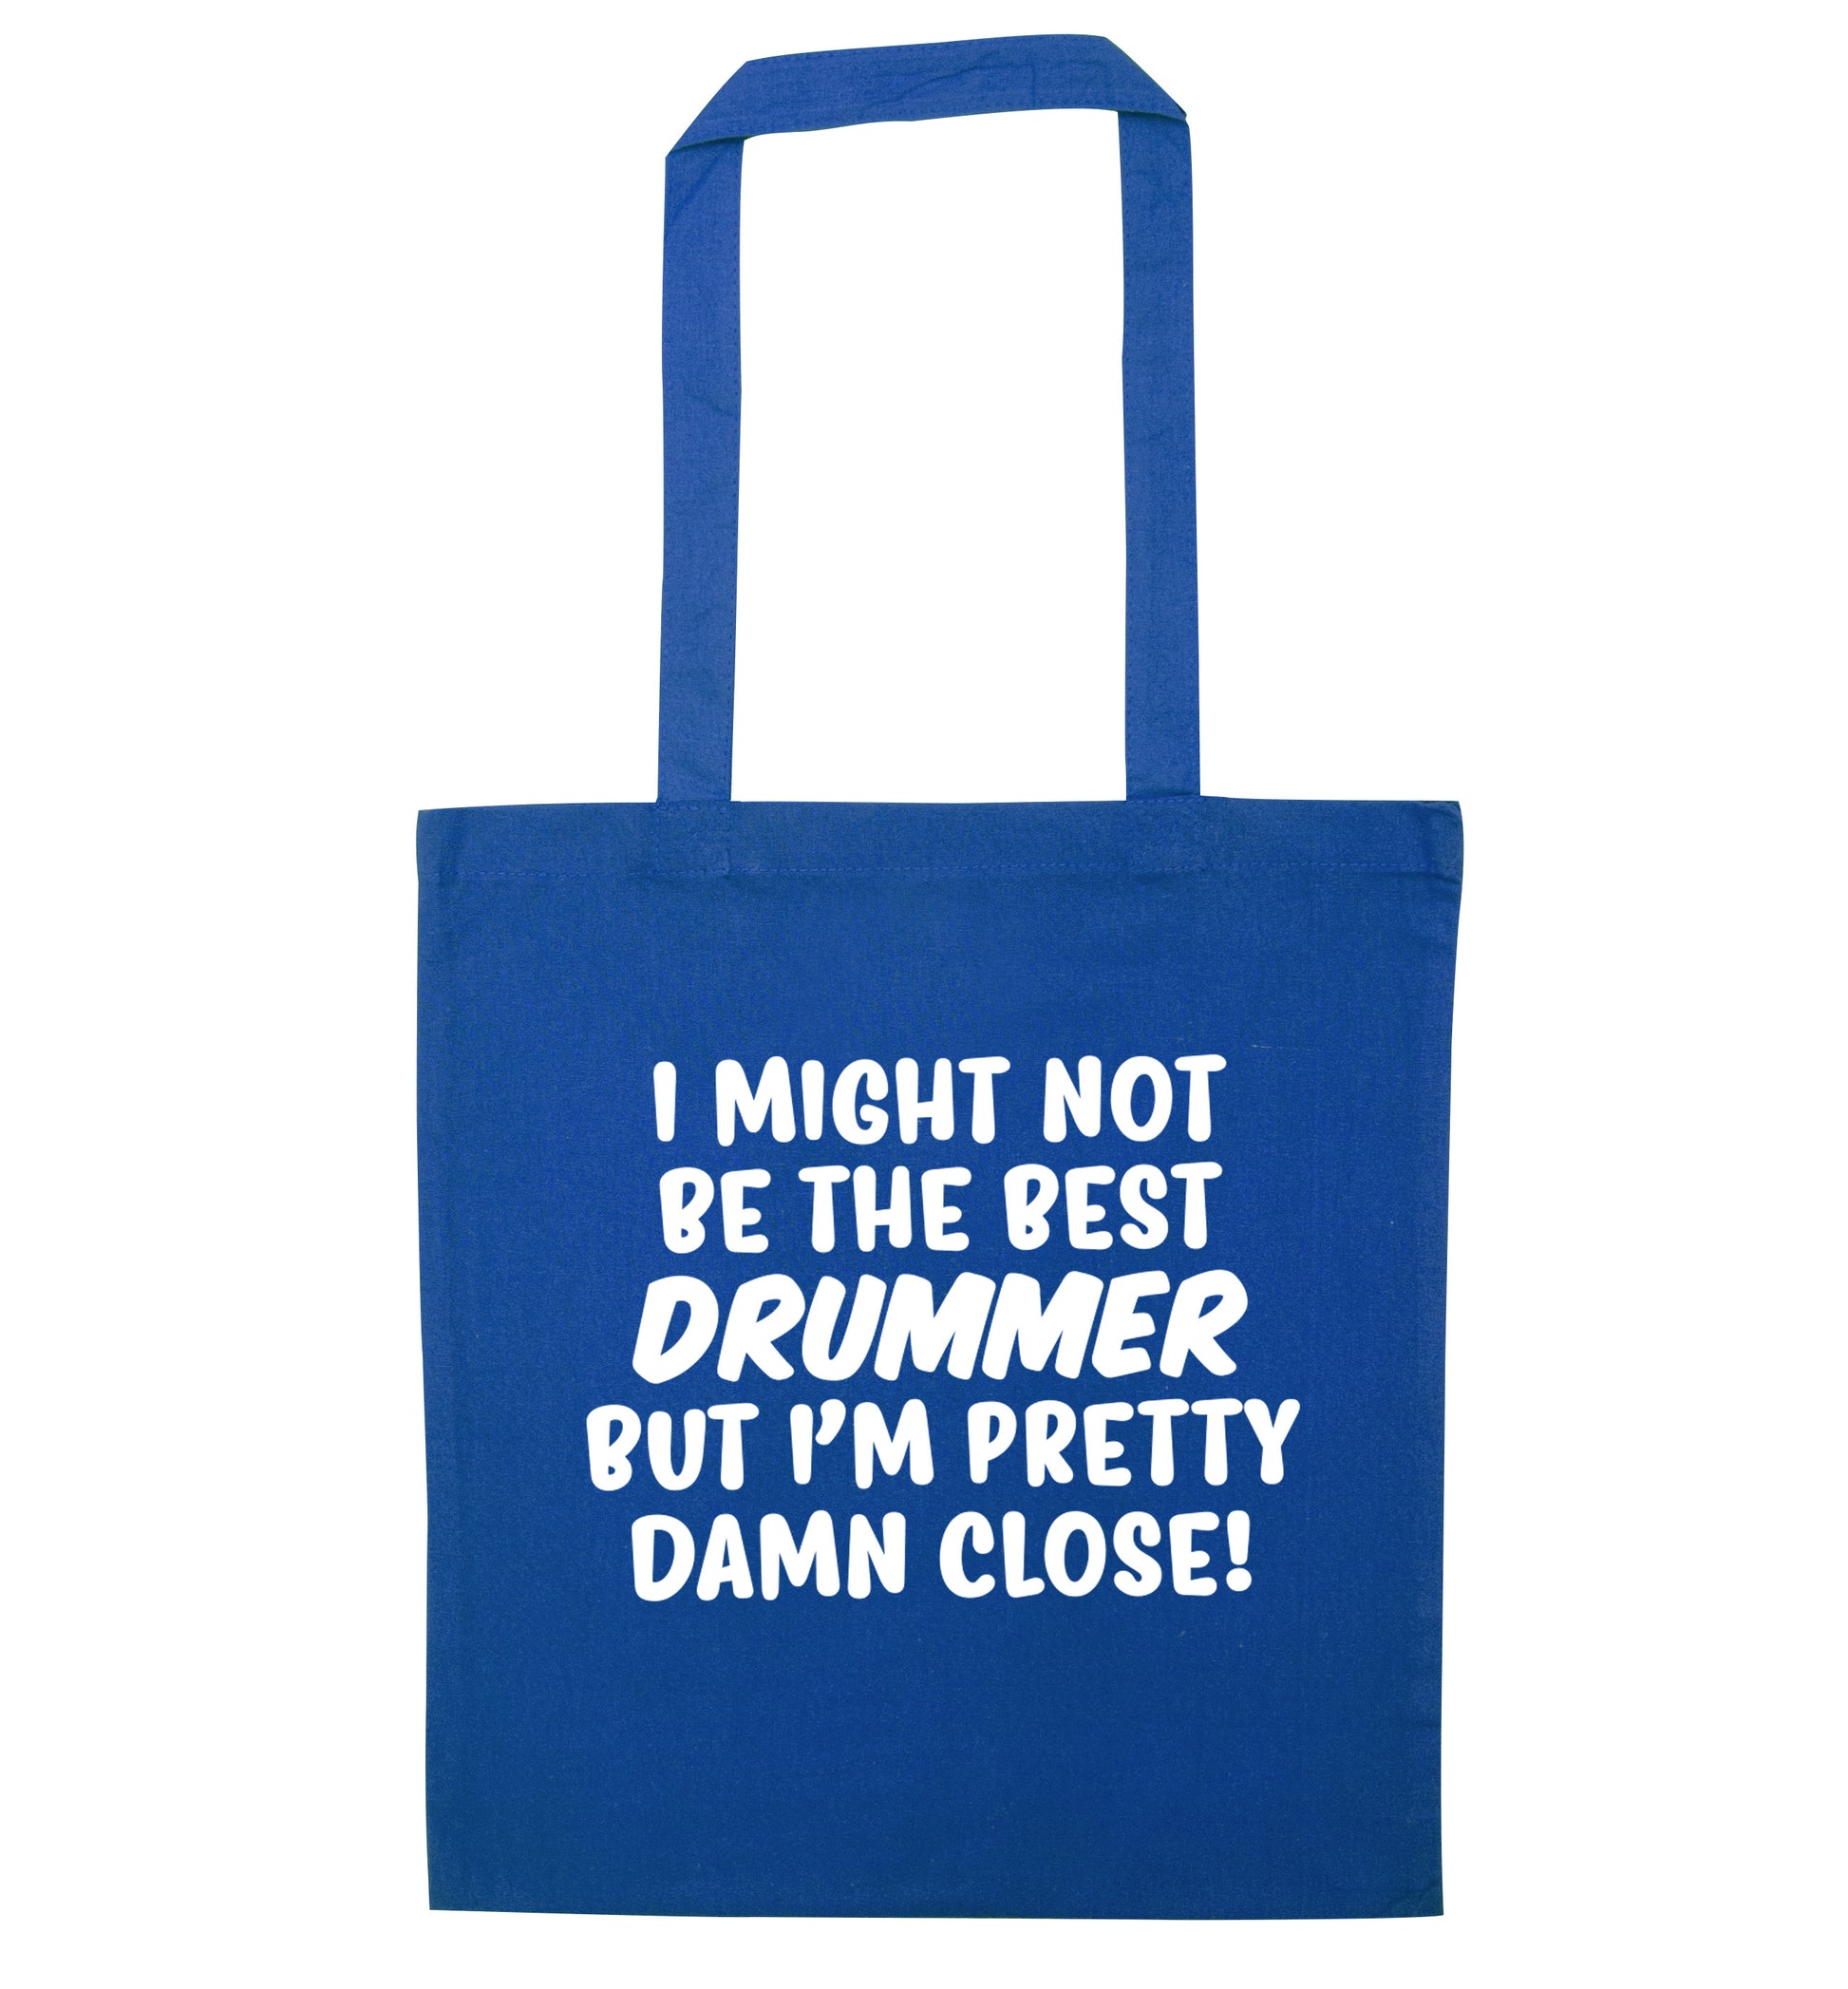 I might not be the best drummer but I'm pretty close! blue tote bag